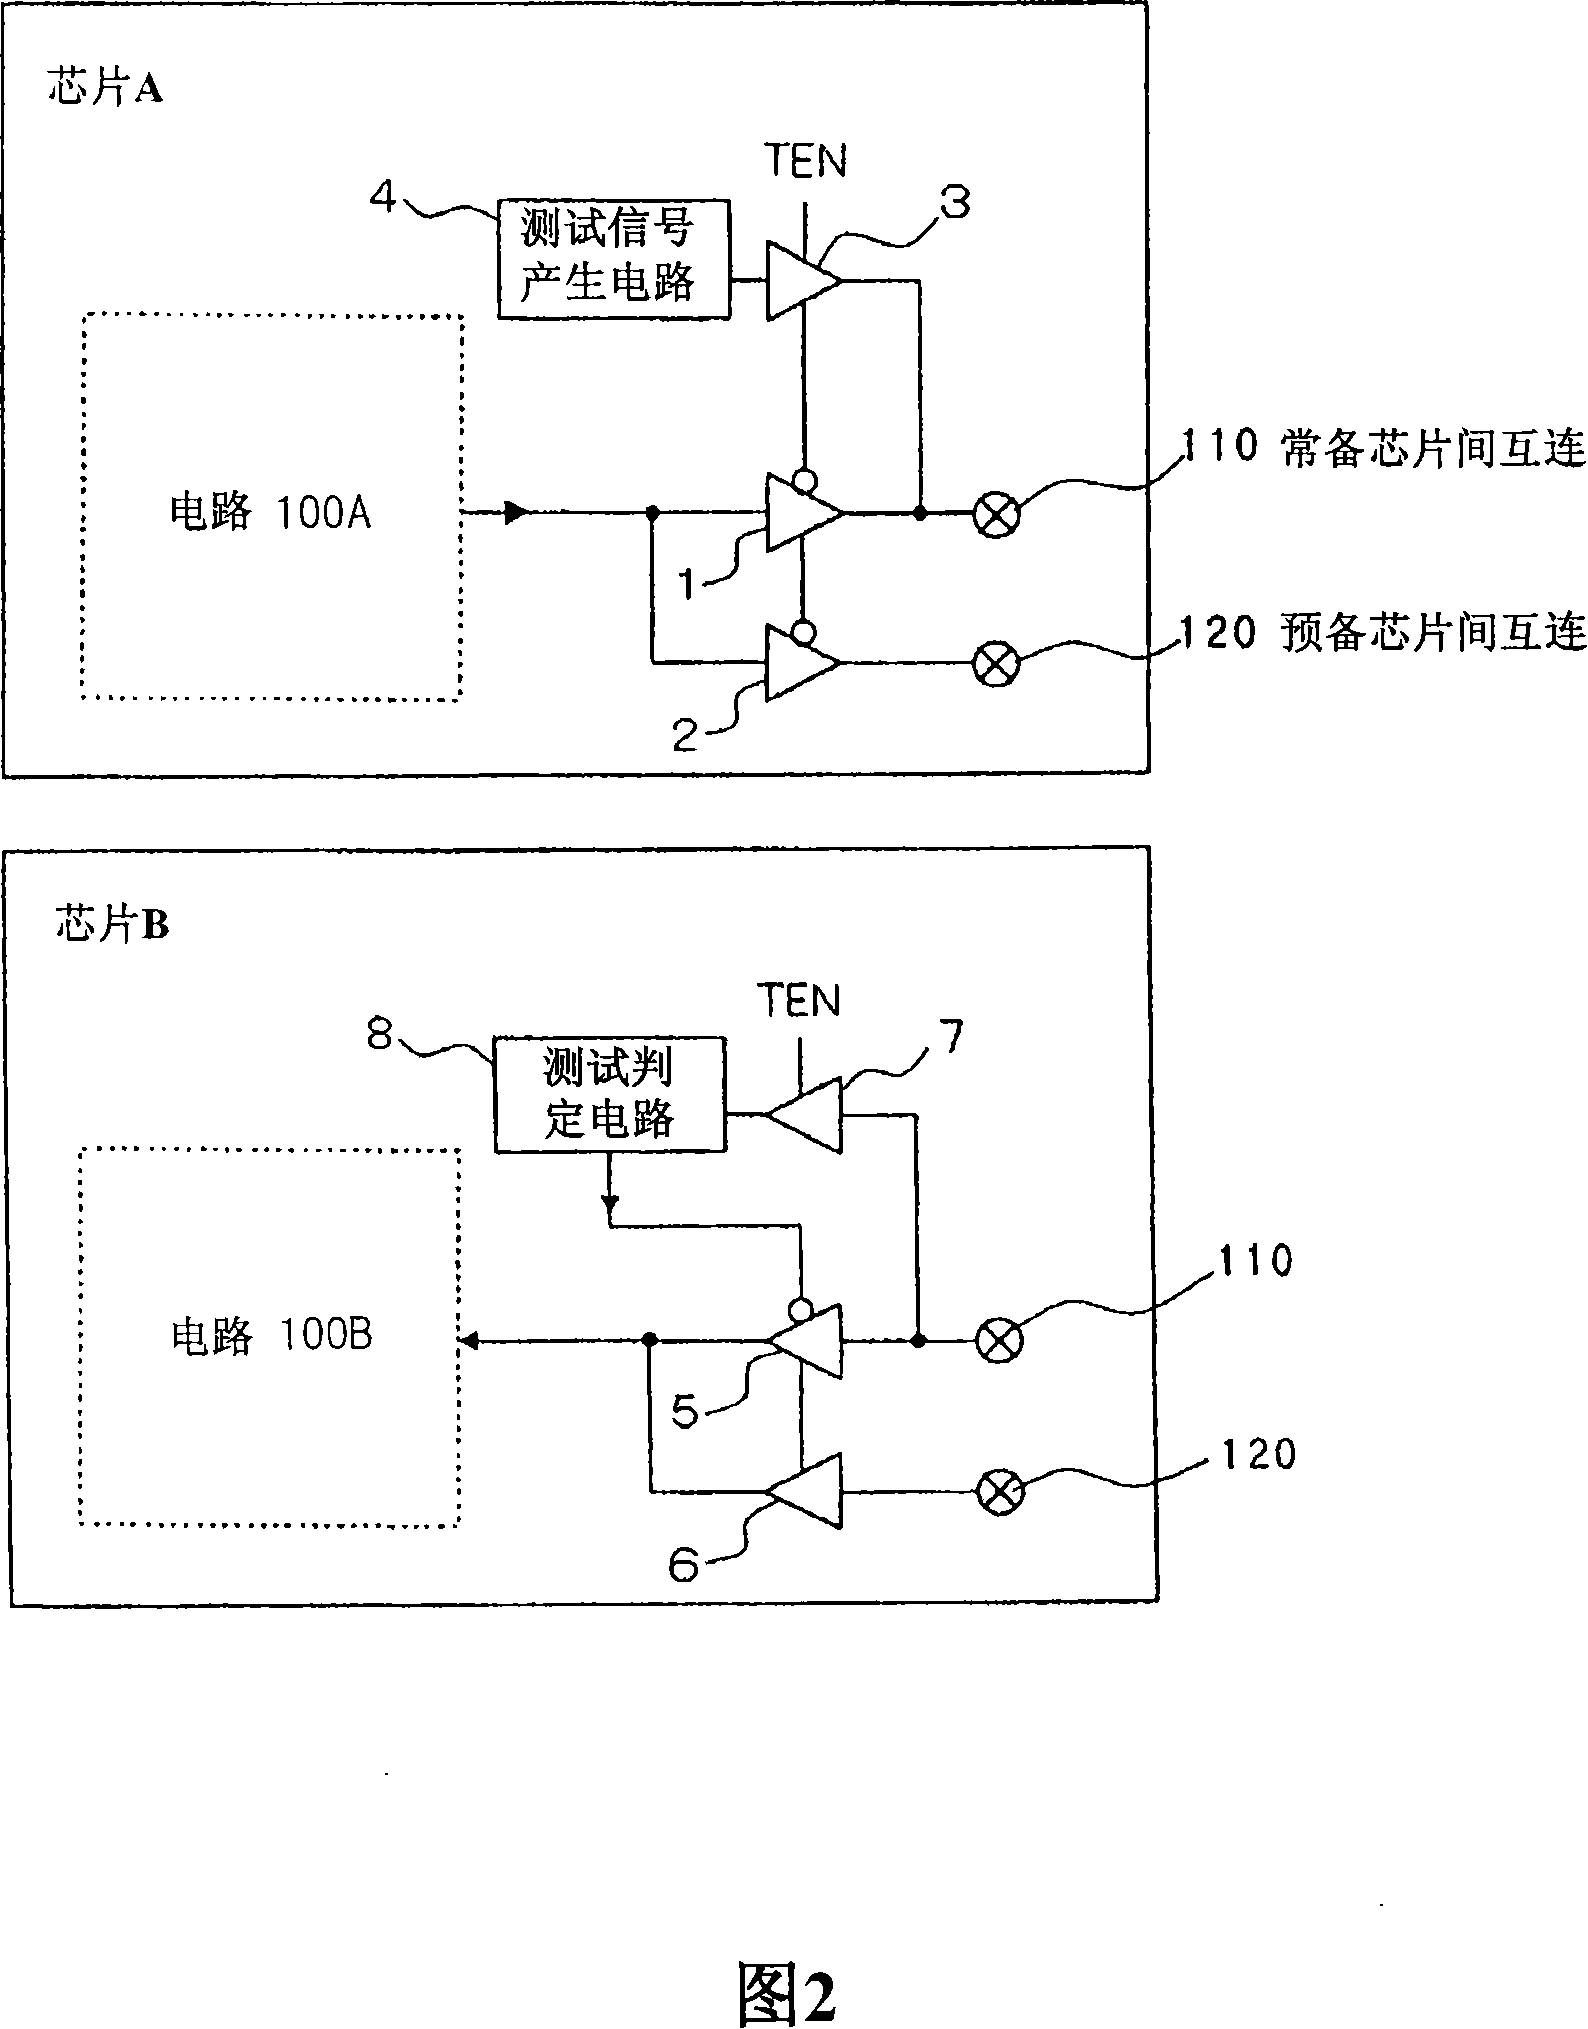 Semiconductor device, semiconductor chip, method for testing wiring between chips and method for switching wiring between chips